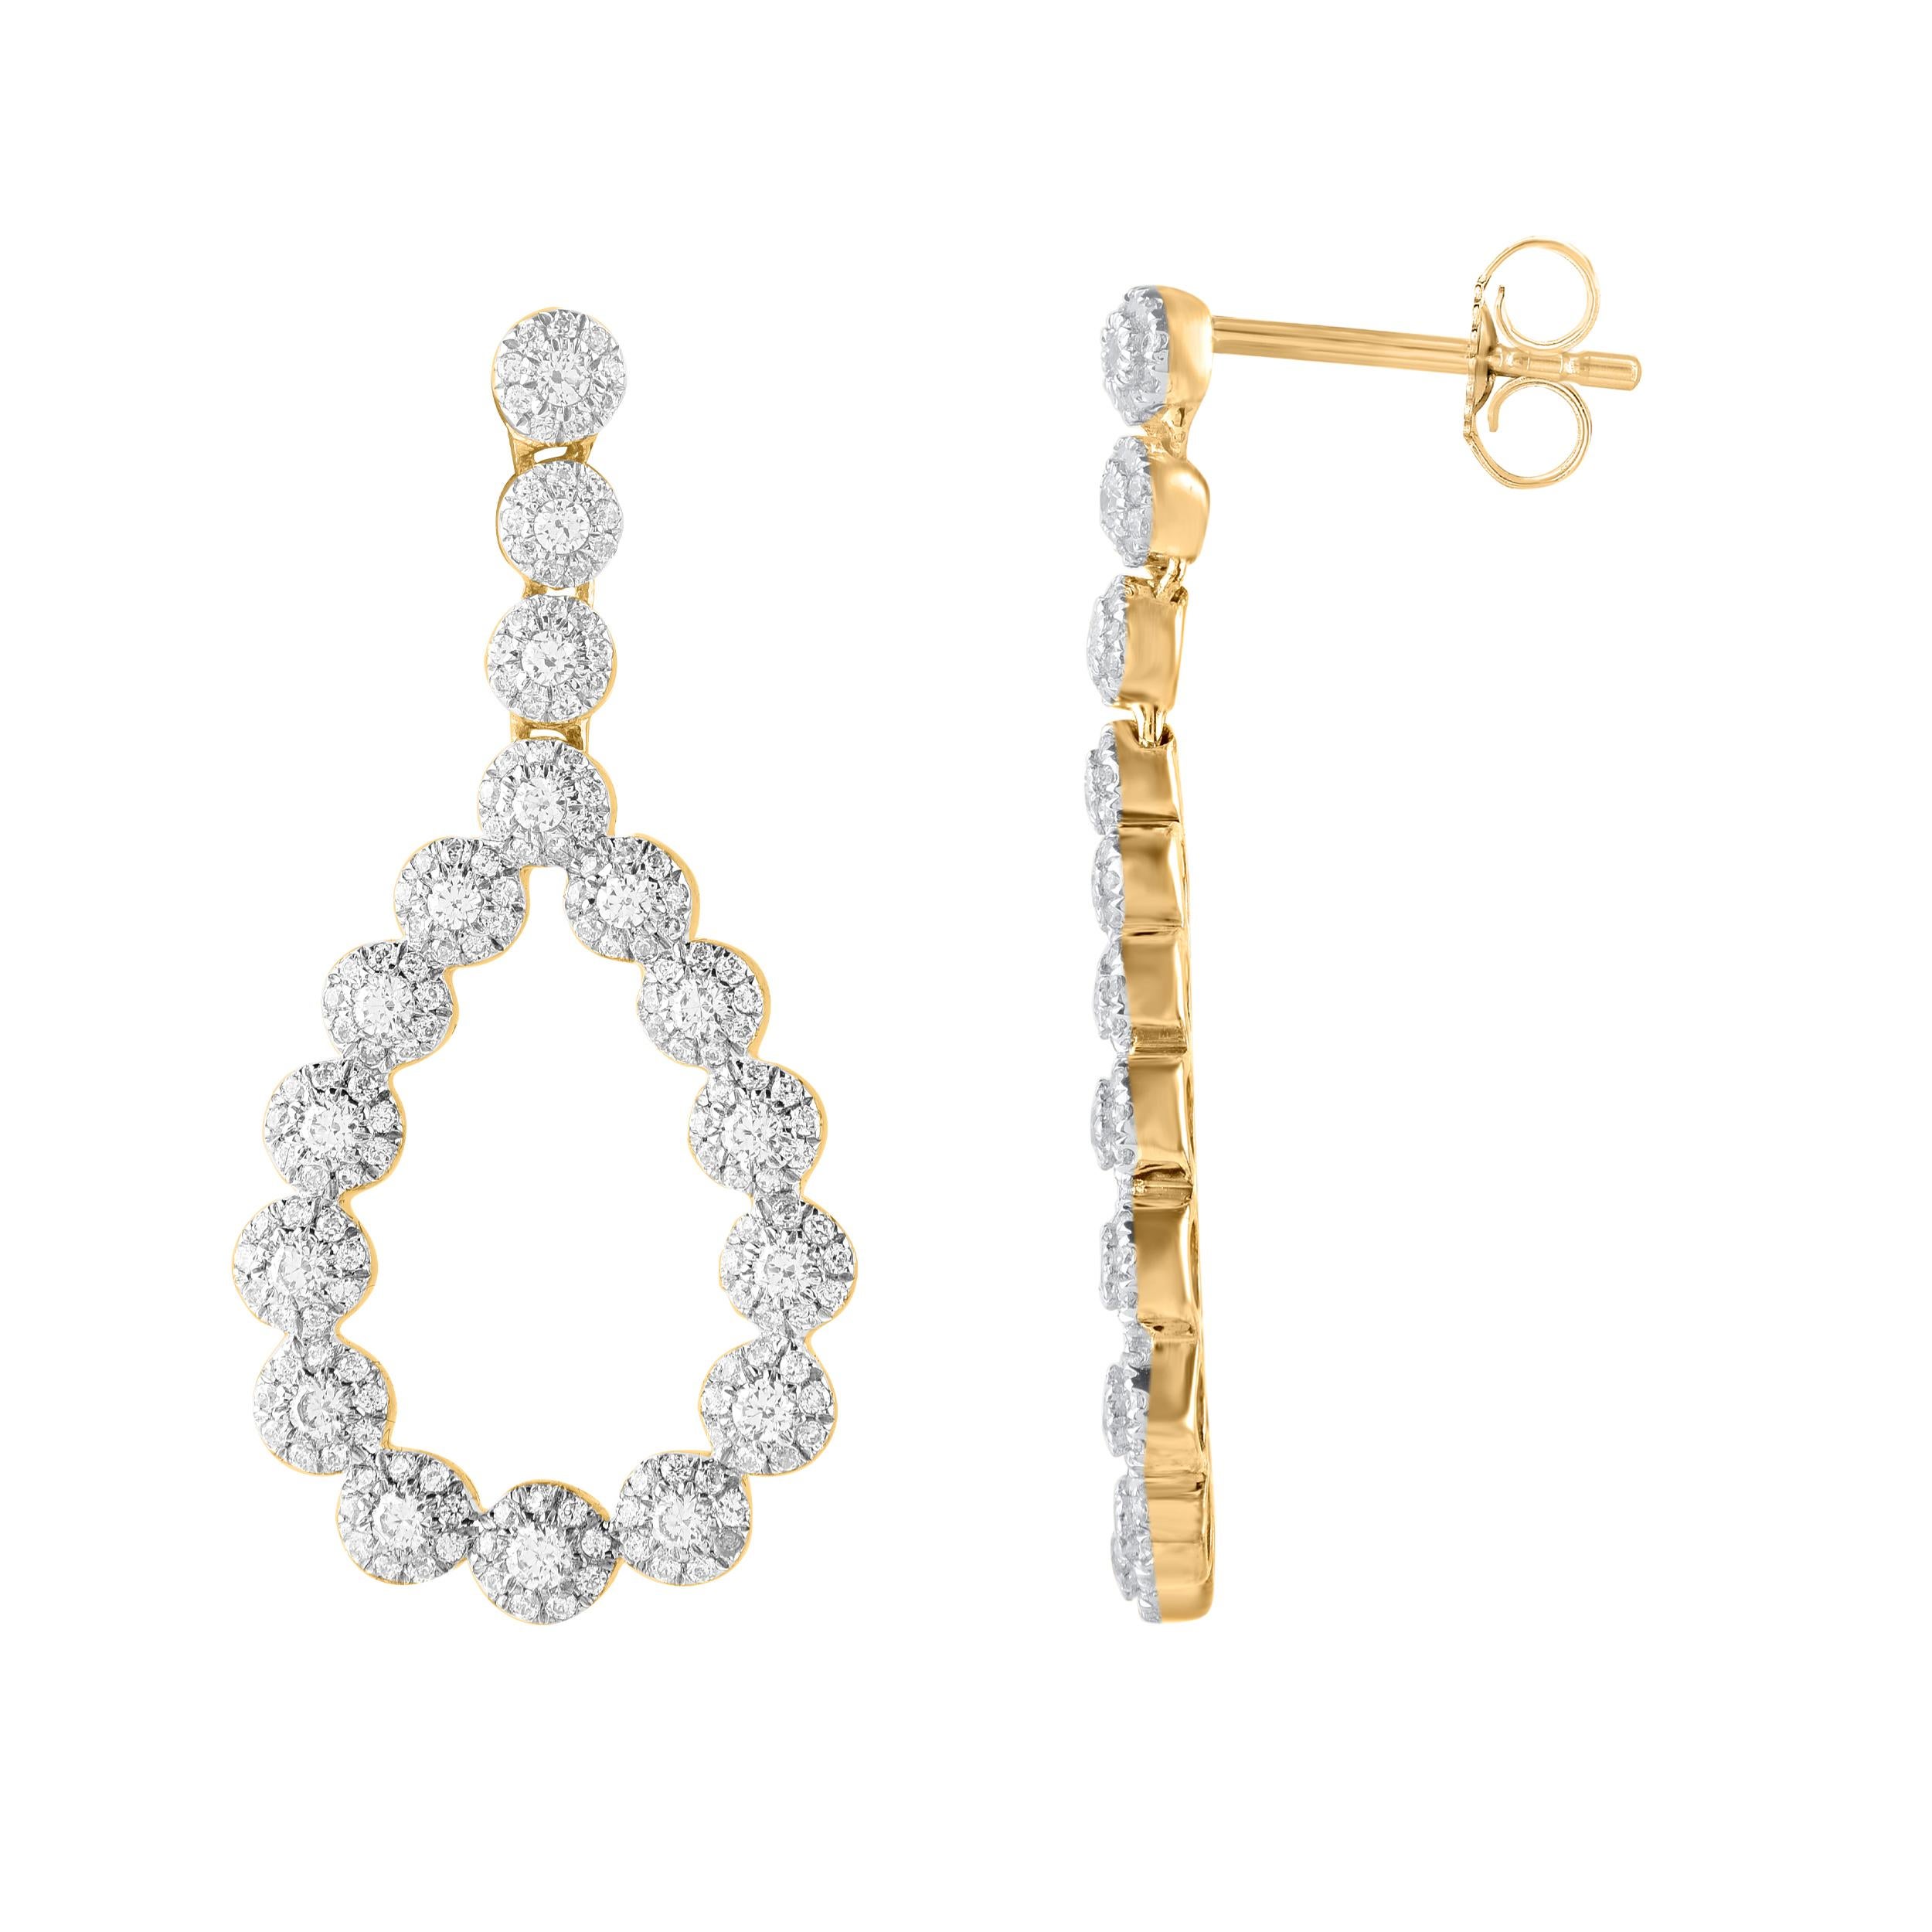 The perfect complement to her classic style, this diamond teardrop earrings shines with your happily ever after. These earrings feature clusters of dazzling with 340 single cut & brilliant cut round diamond set in prong setting. These drop earrings